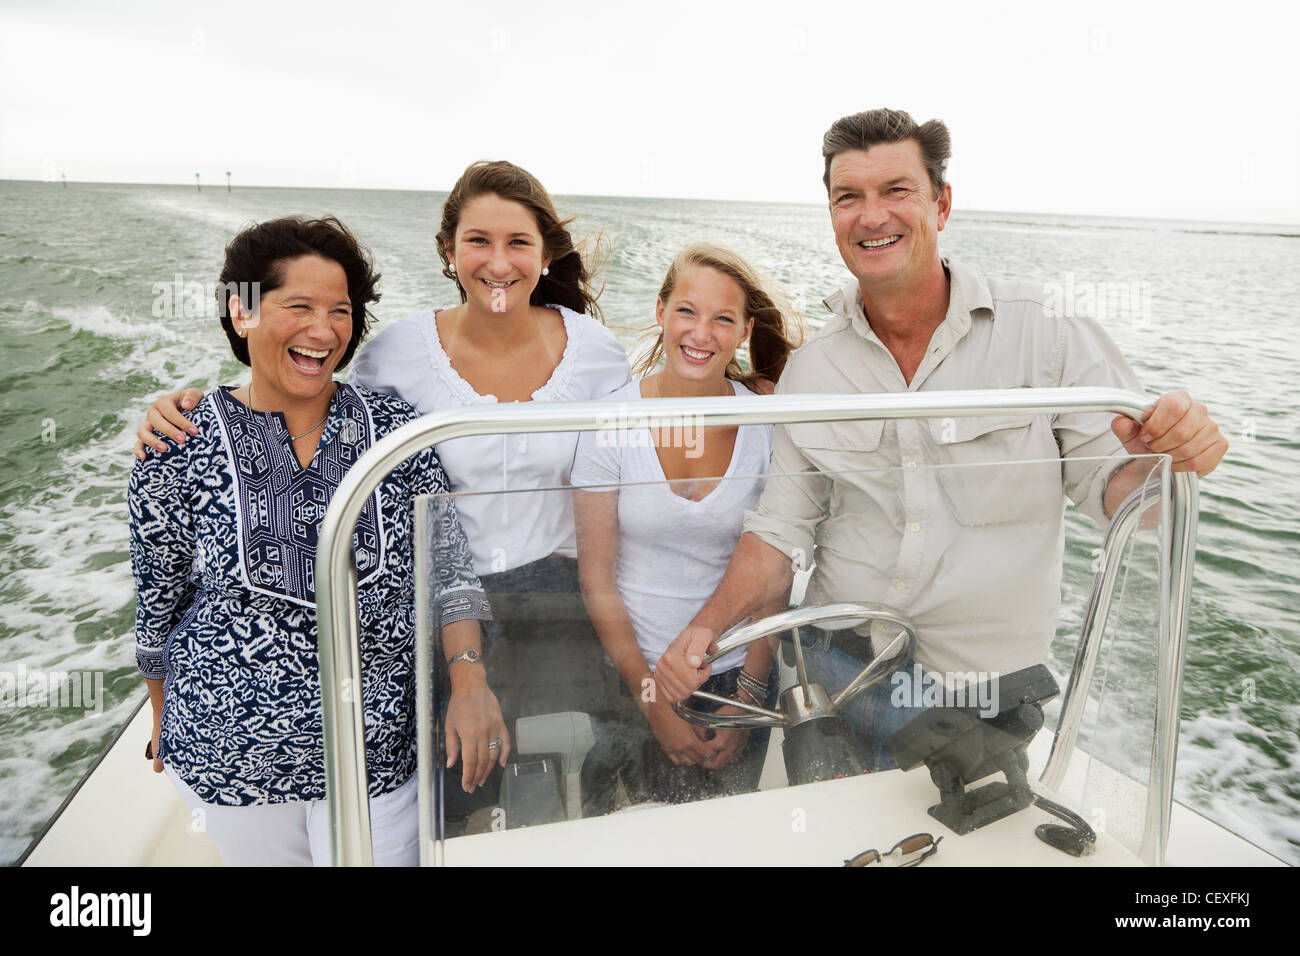 Smiling family boating outdoors Stock Photo